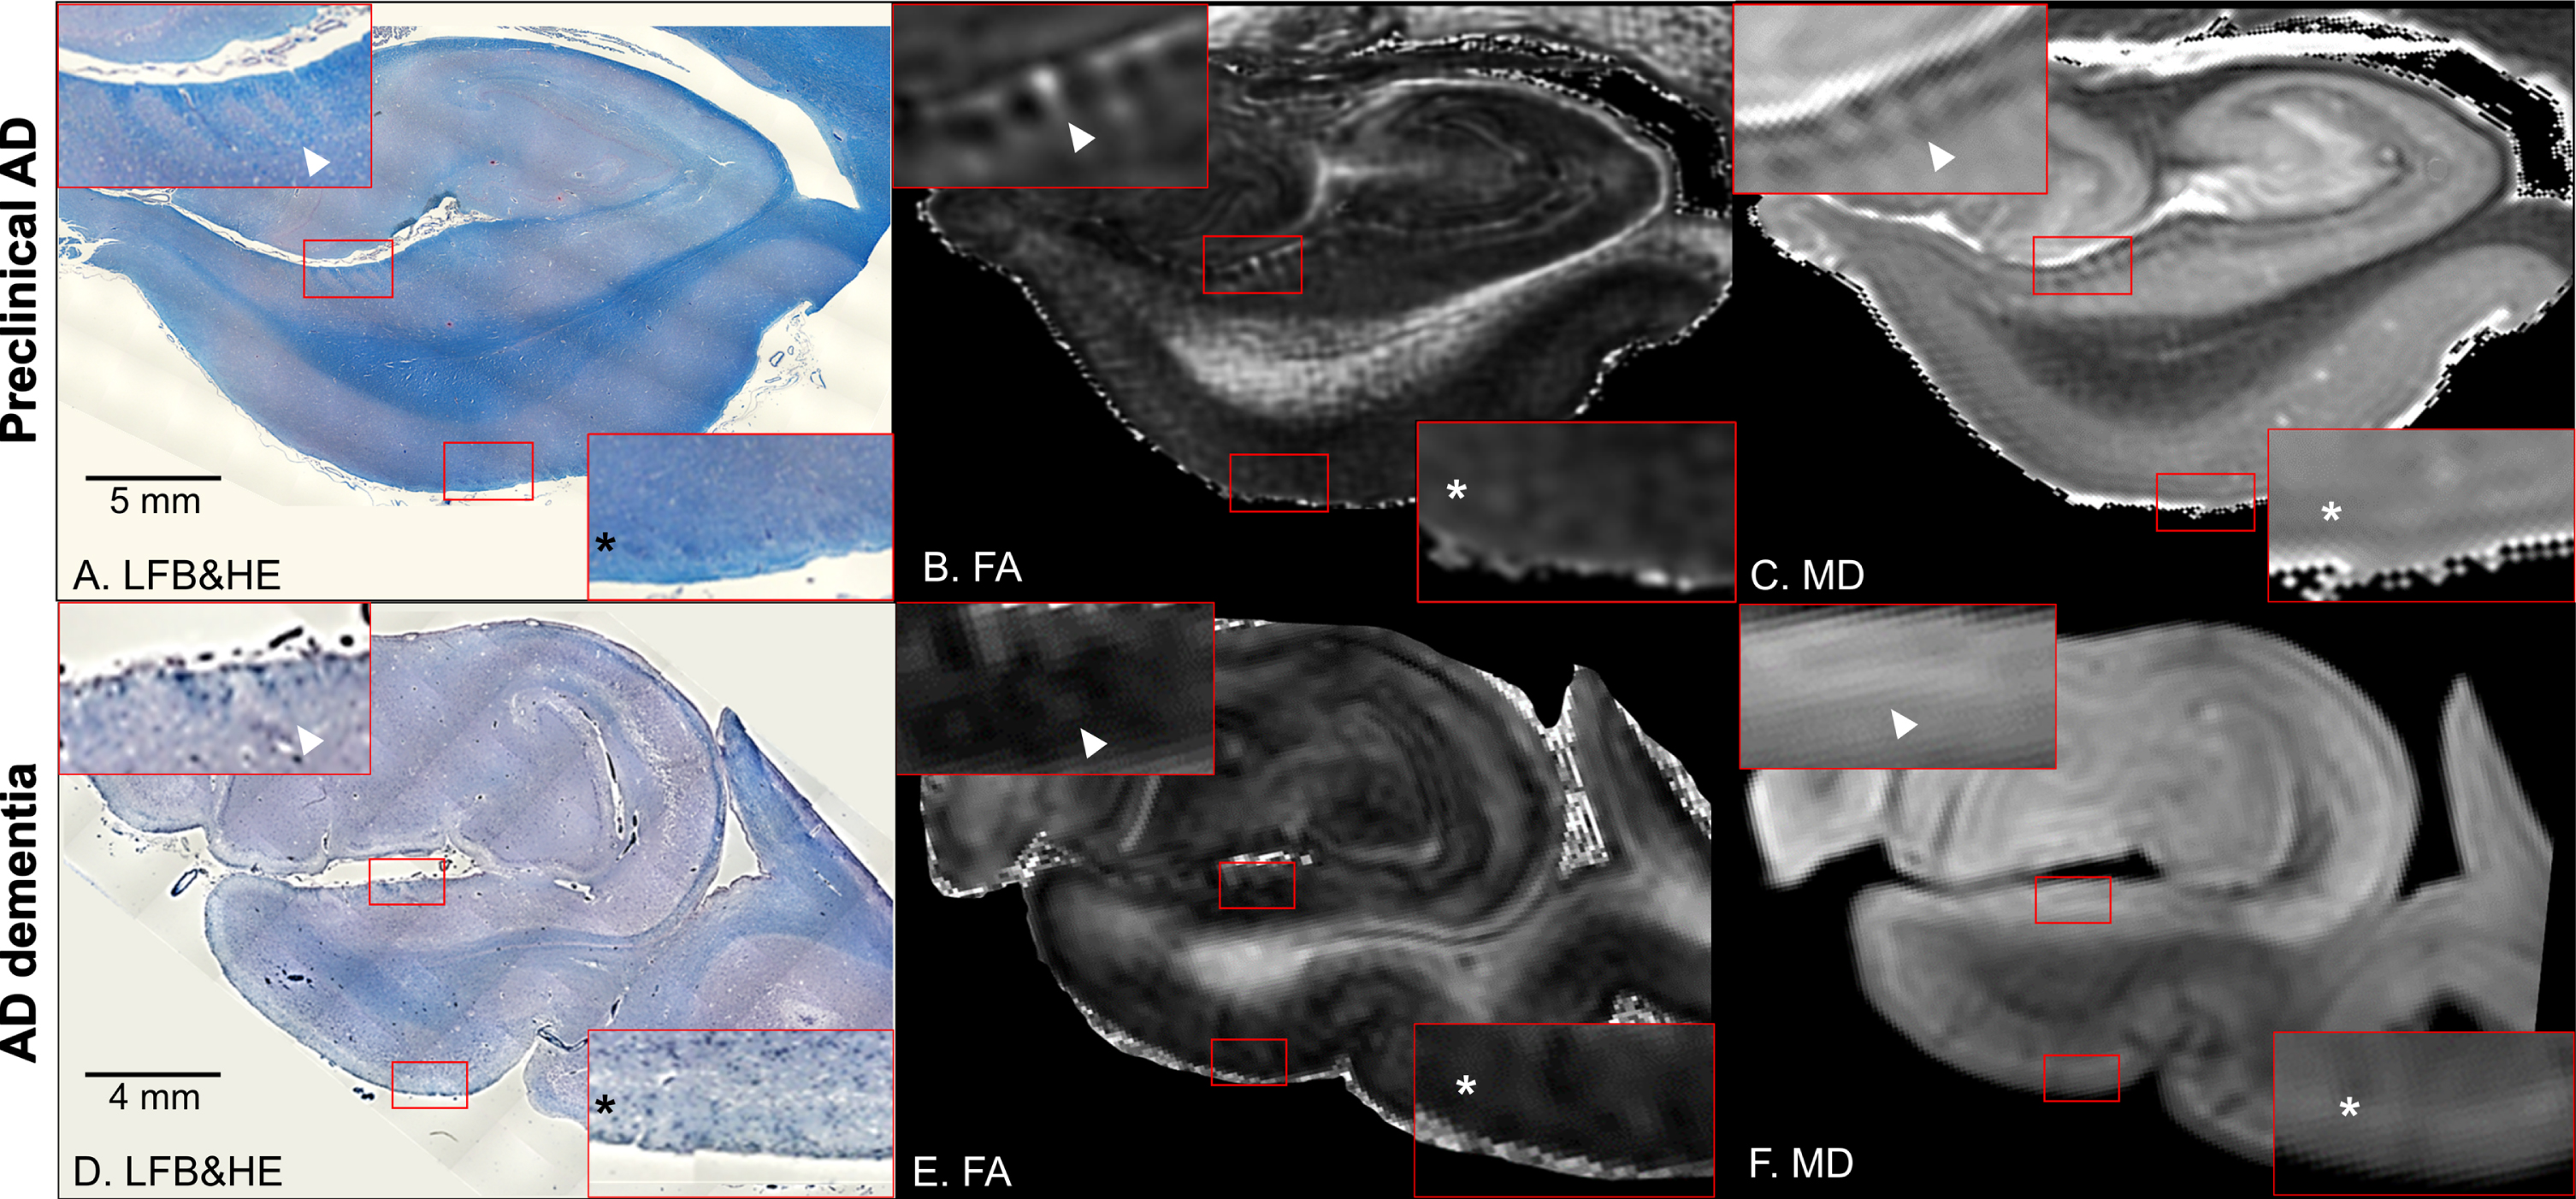 Coronal panels of the left entorhinal cortex in preclinical Alzheimer’s disease (AD) (A–C) and AD dementia brain tissues (D–F). A, D) Luxol fast blue with hematoxylin and eosin staining (LFB&HE). B, E) Fractional anisotropy (FA) maps. C, F) Mean diffusivity (MD) maps. The red bounding boxes are 5× magnified to clearly visualize the perforant path fibers on the presubiculum (left-upper panel) and the entorhinal layer II islands (right-lower panel). Arrowheads point to myelinated fibers in the presubiculum and asterisks denote the entorhinal layer II cortices (A–F). Note that these cortical substructures are not clearly discernible in the AD dementia brain tissue.